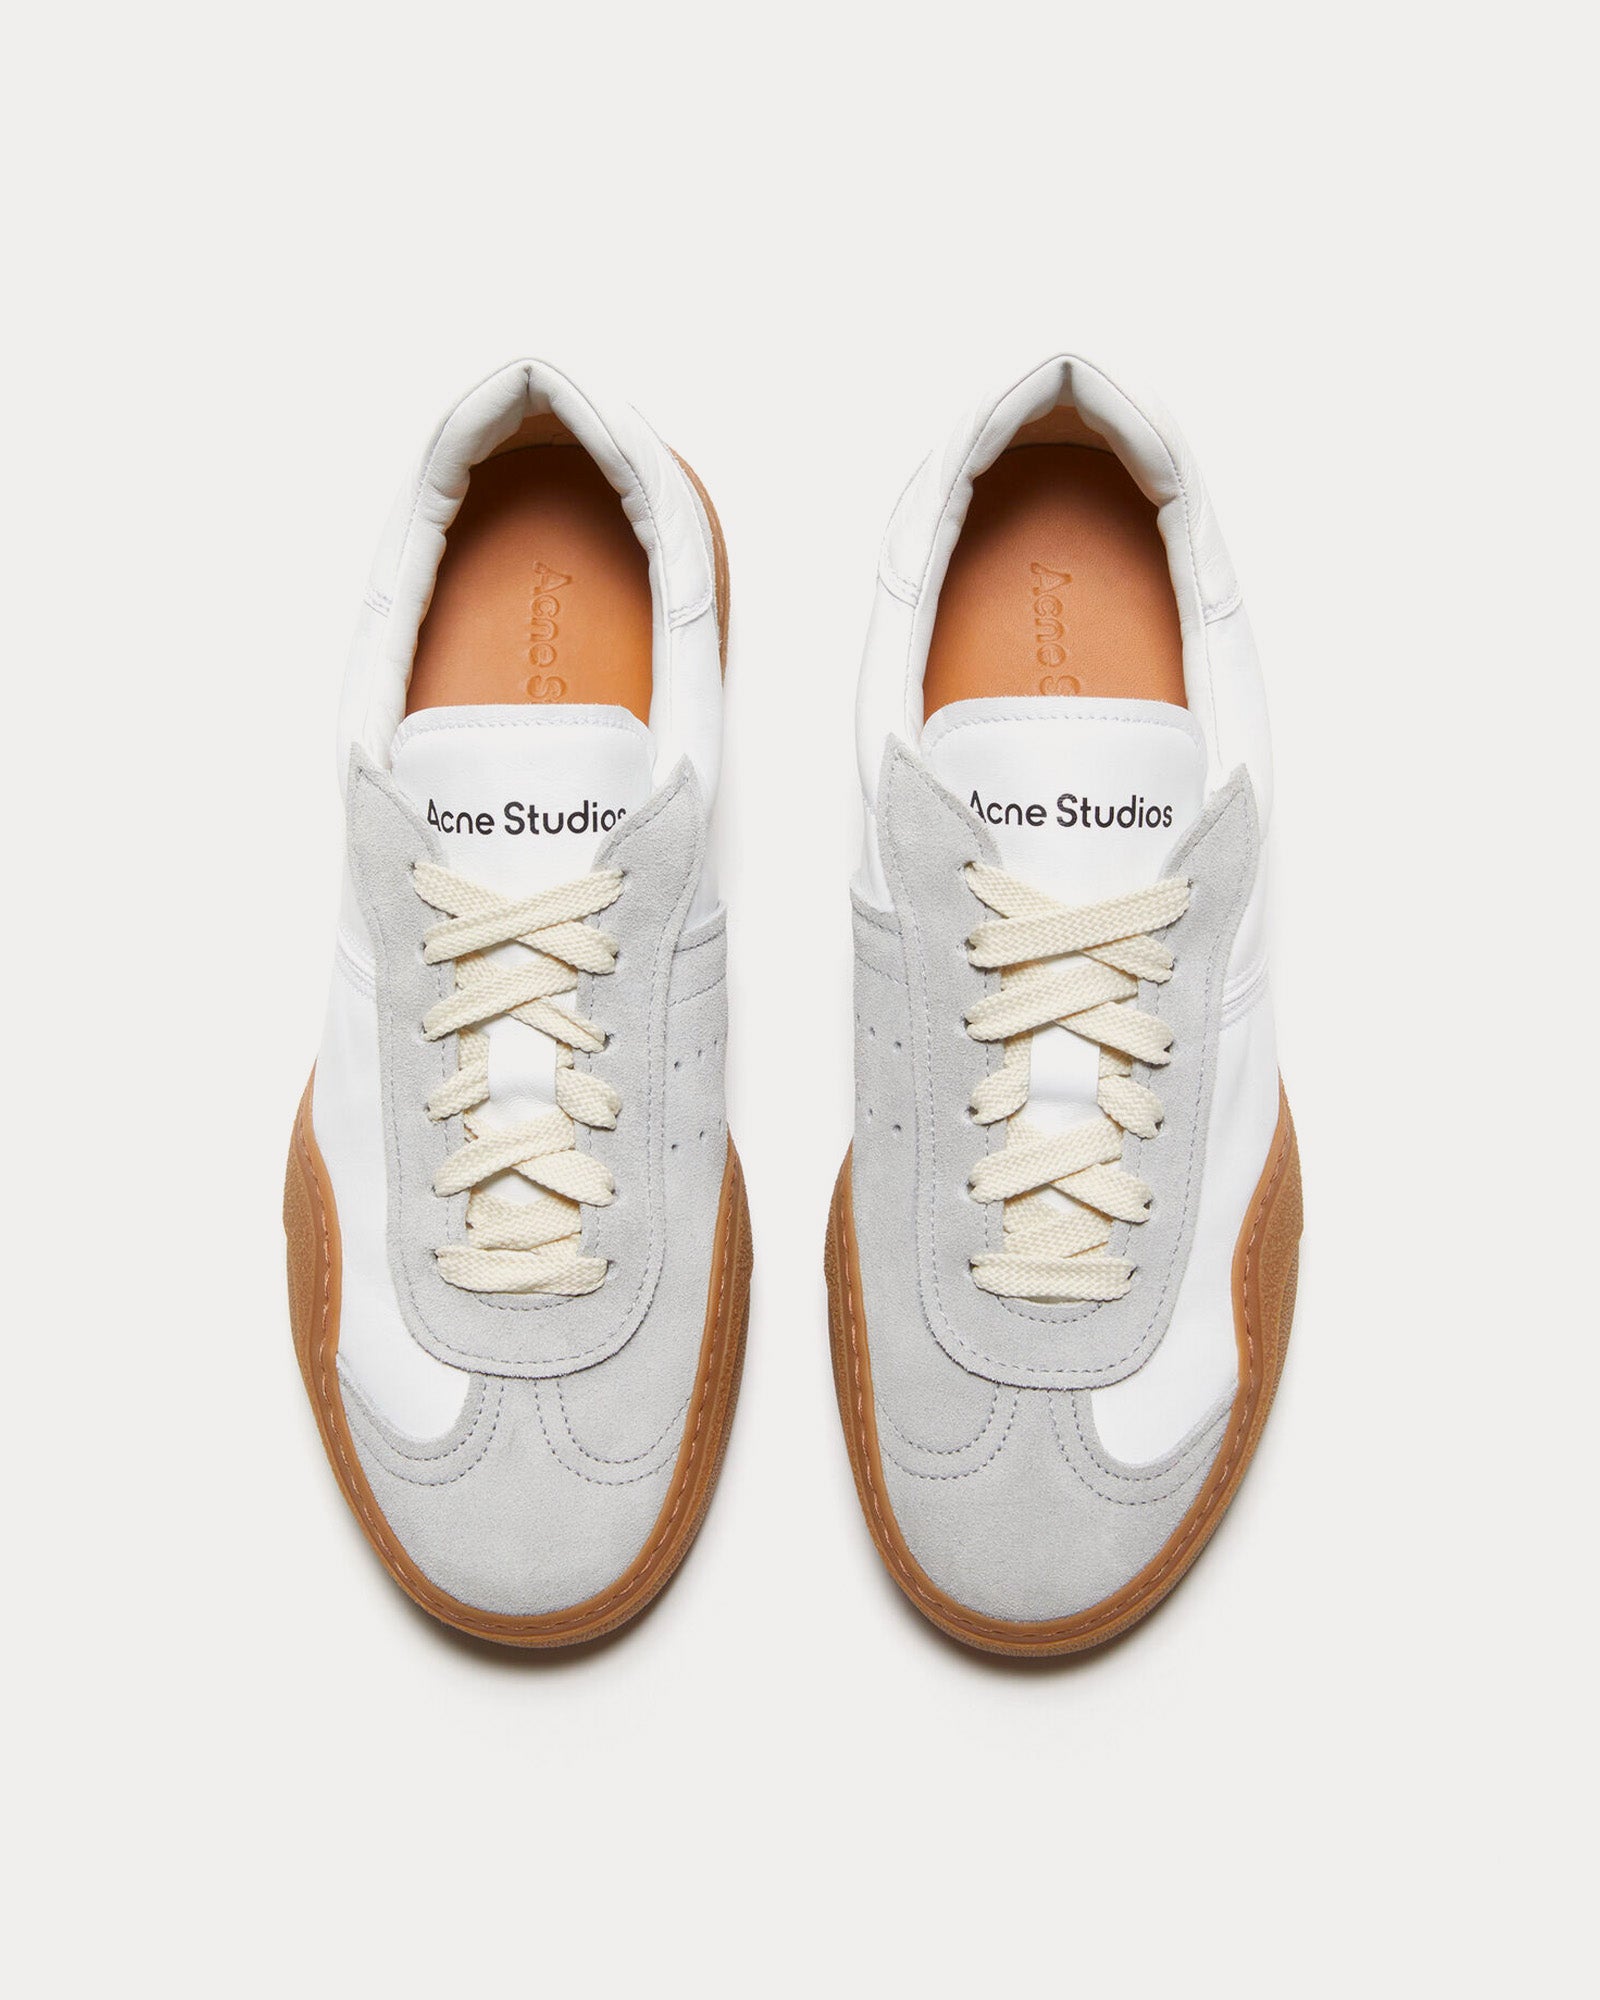 Acne Studios - Bars Lace-Up White / Brown Low Top Sneakers